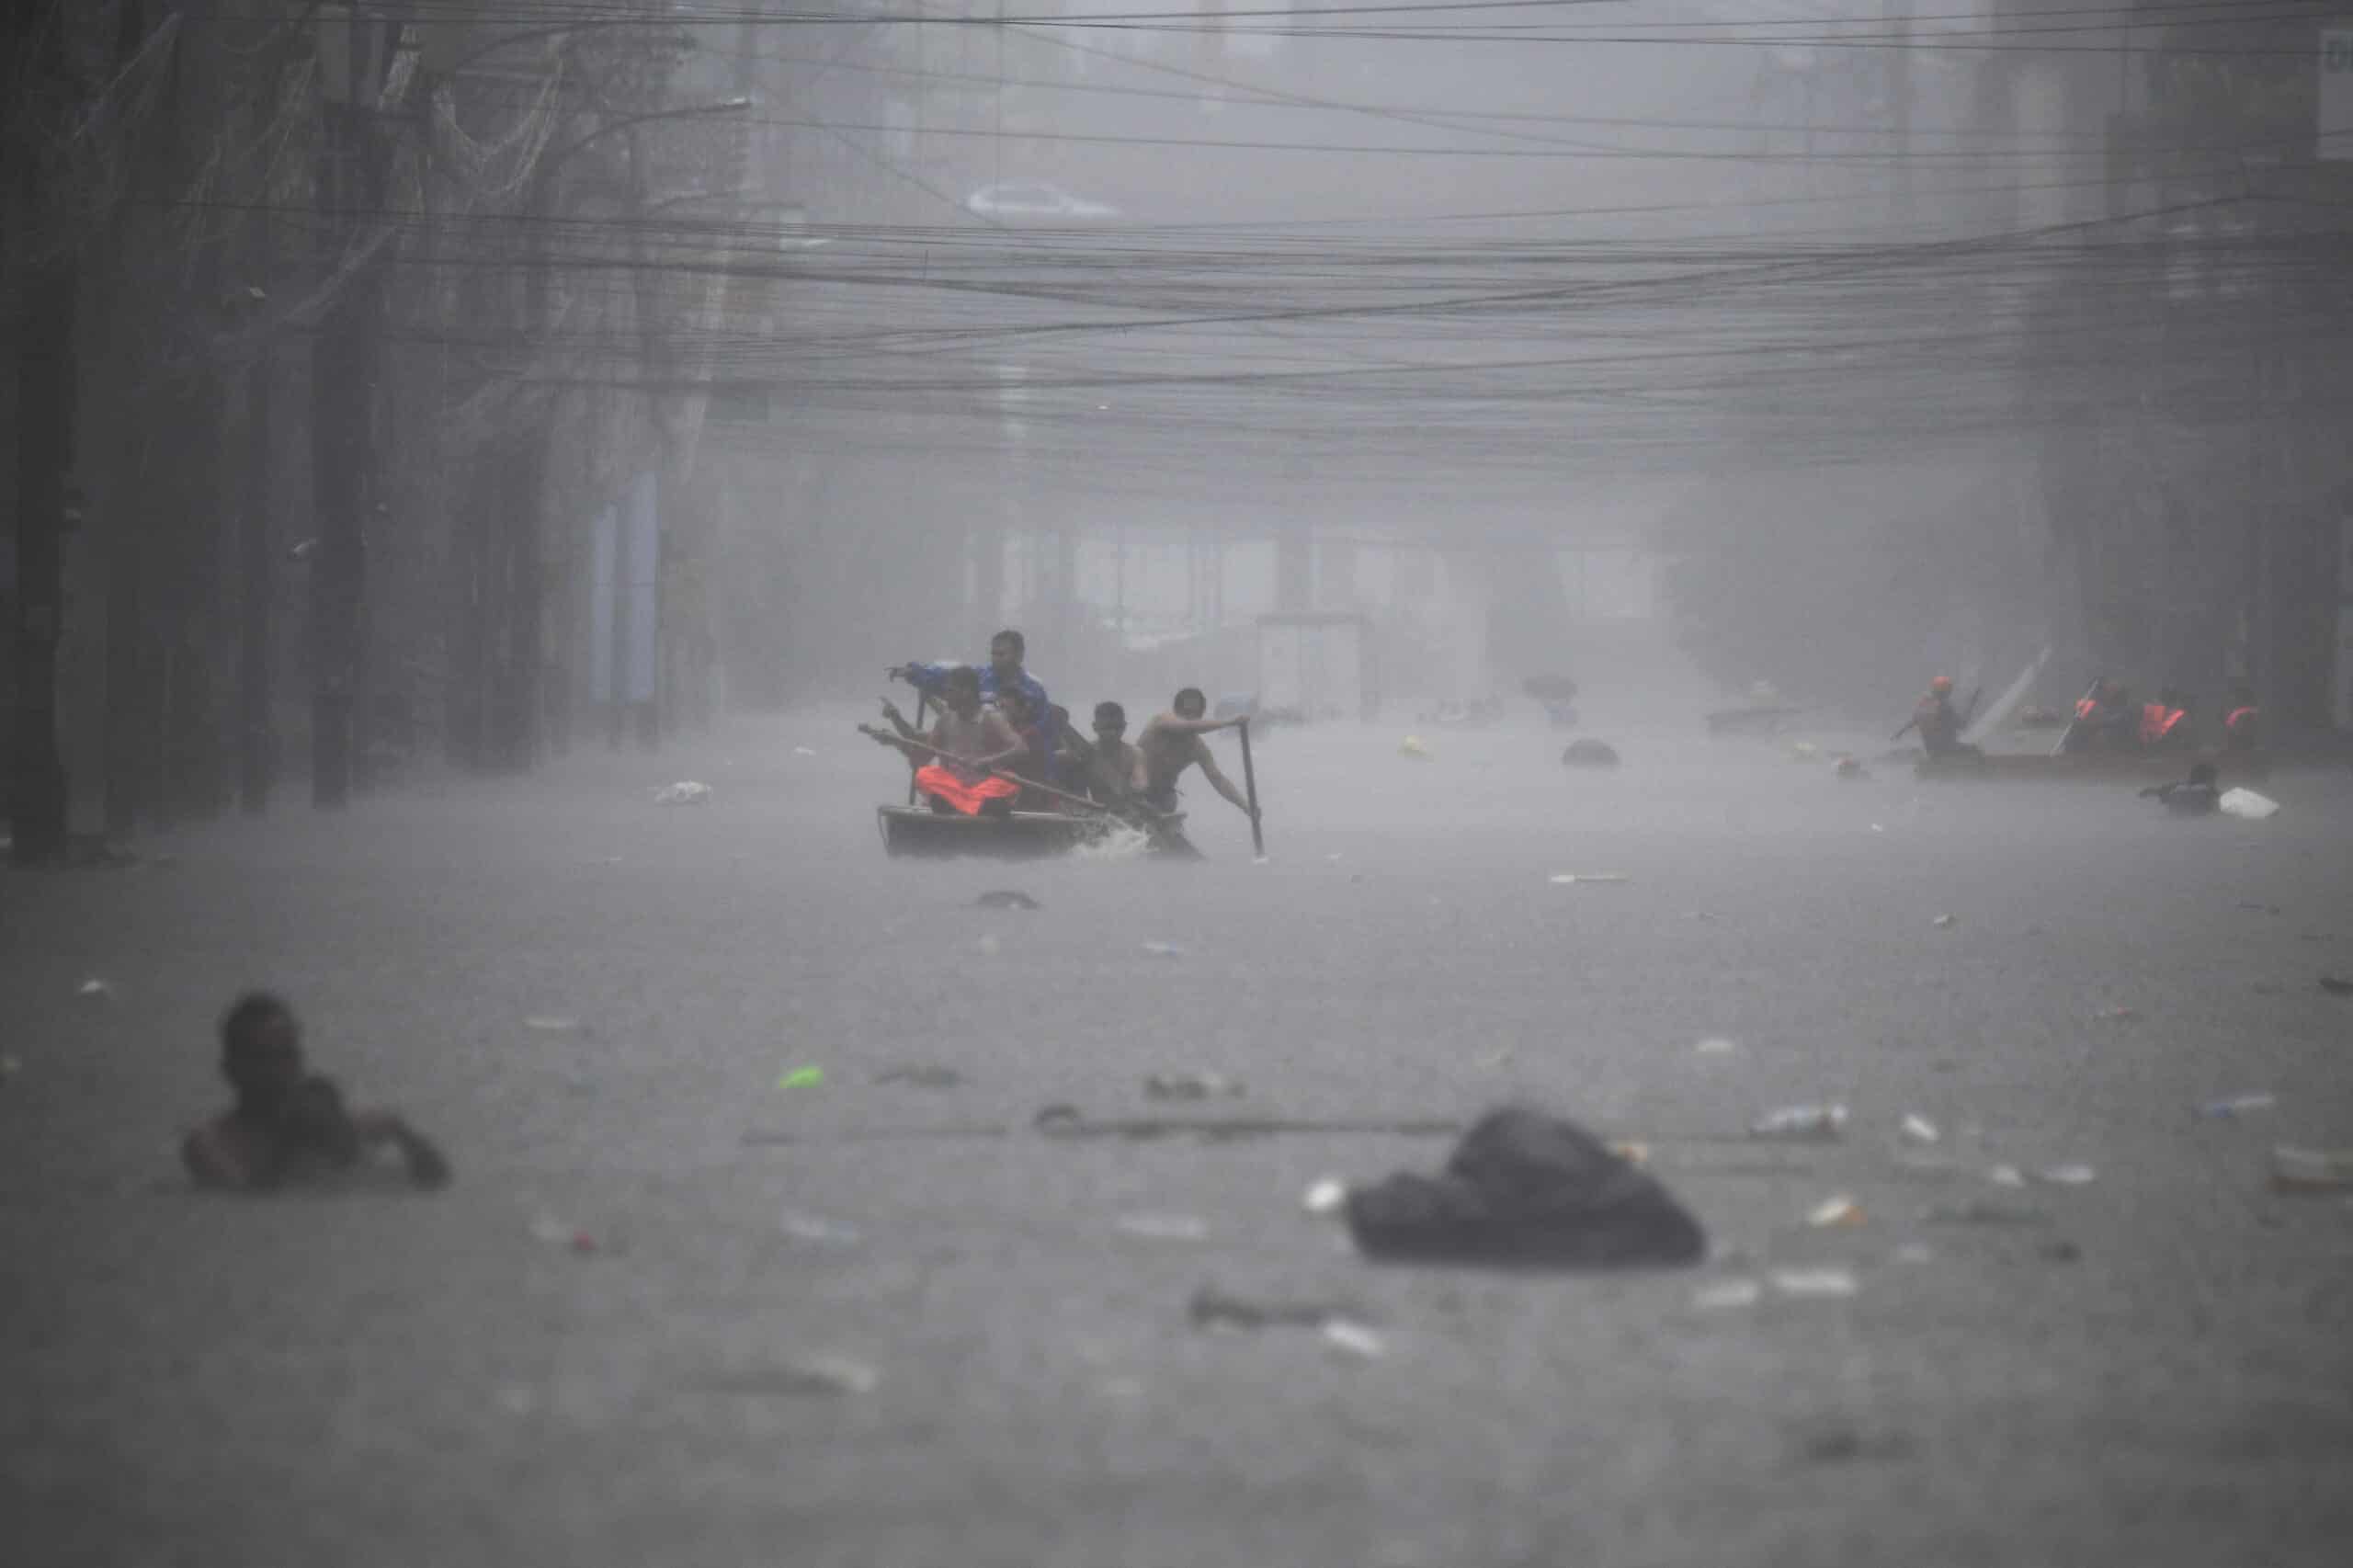 Rescuers paddle their boats along a flooded street in Manila on July 24, 2024 amid heavy rains brought by Typhoon Gaemi.